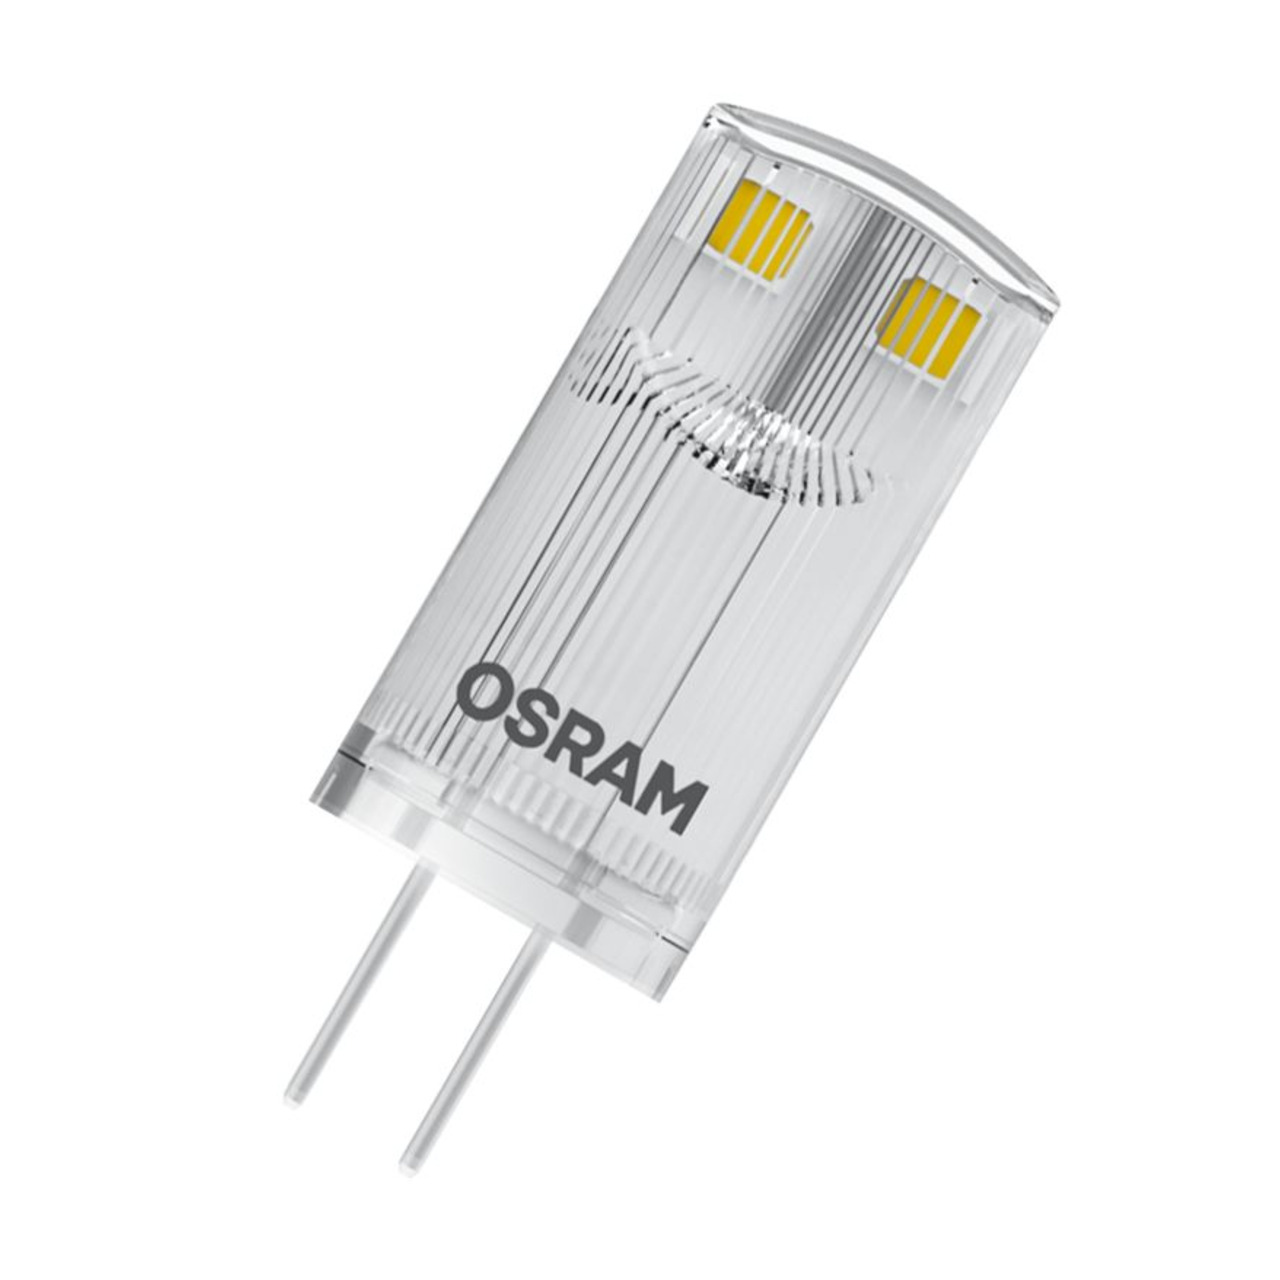 OSRAM 0-9-W-LED-Lampe T12- G4- 100 lm- warmweiss- 320- 12 V unter Beleuchtung